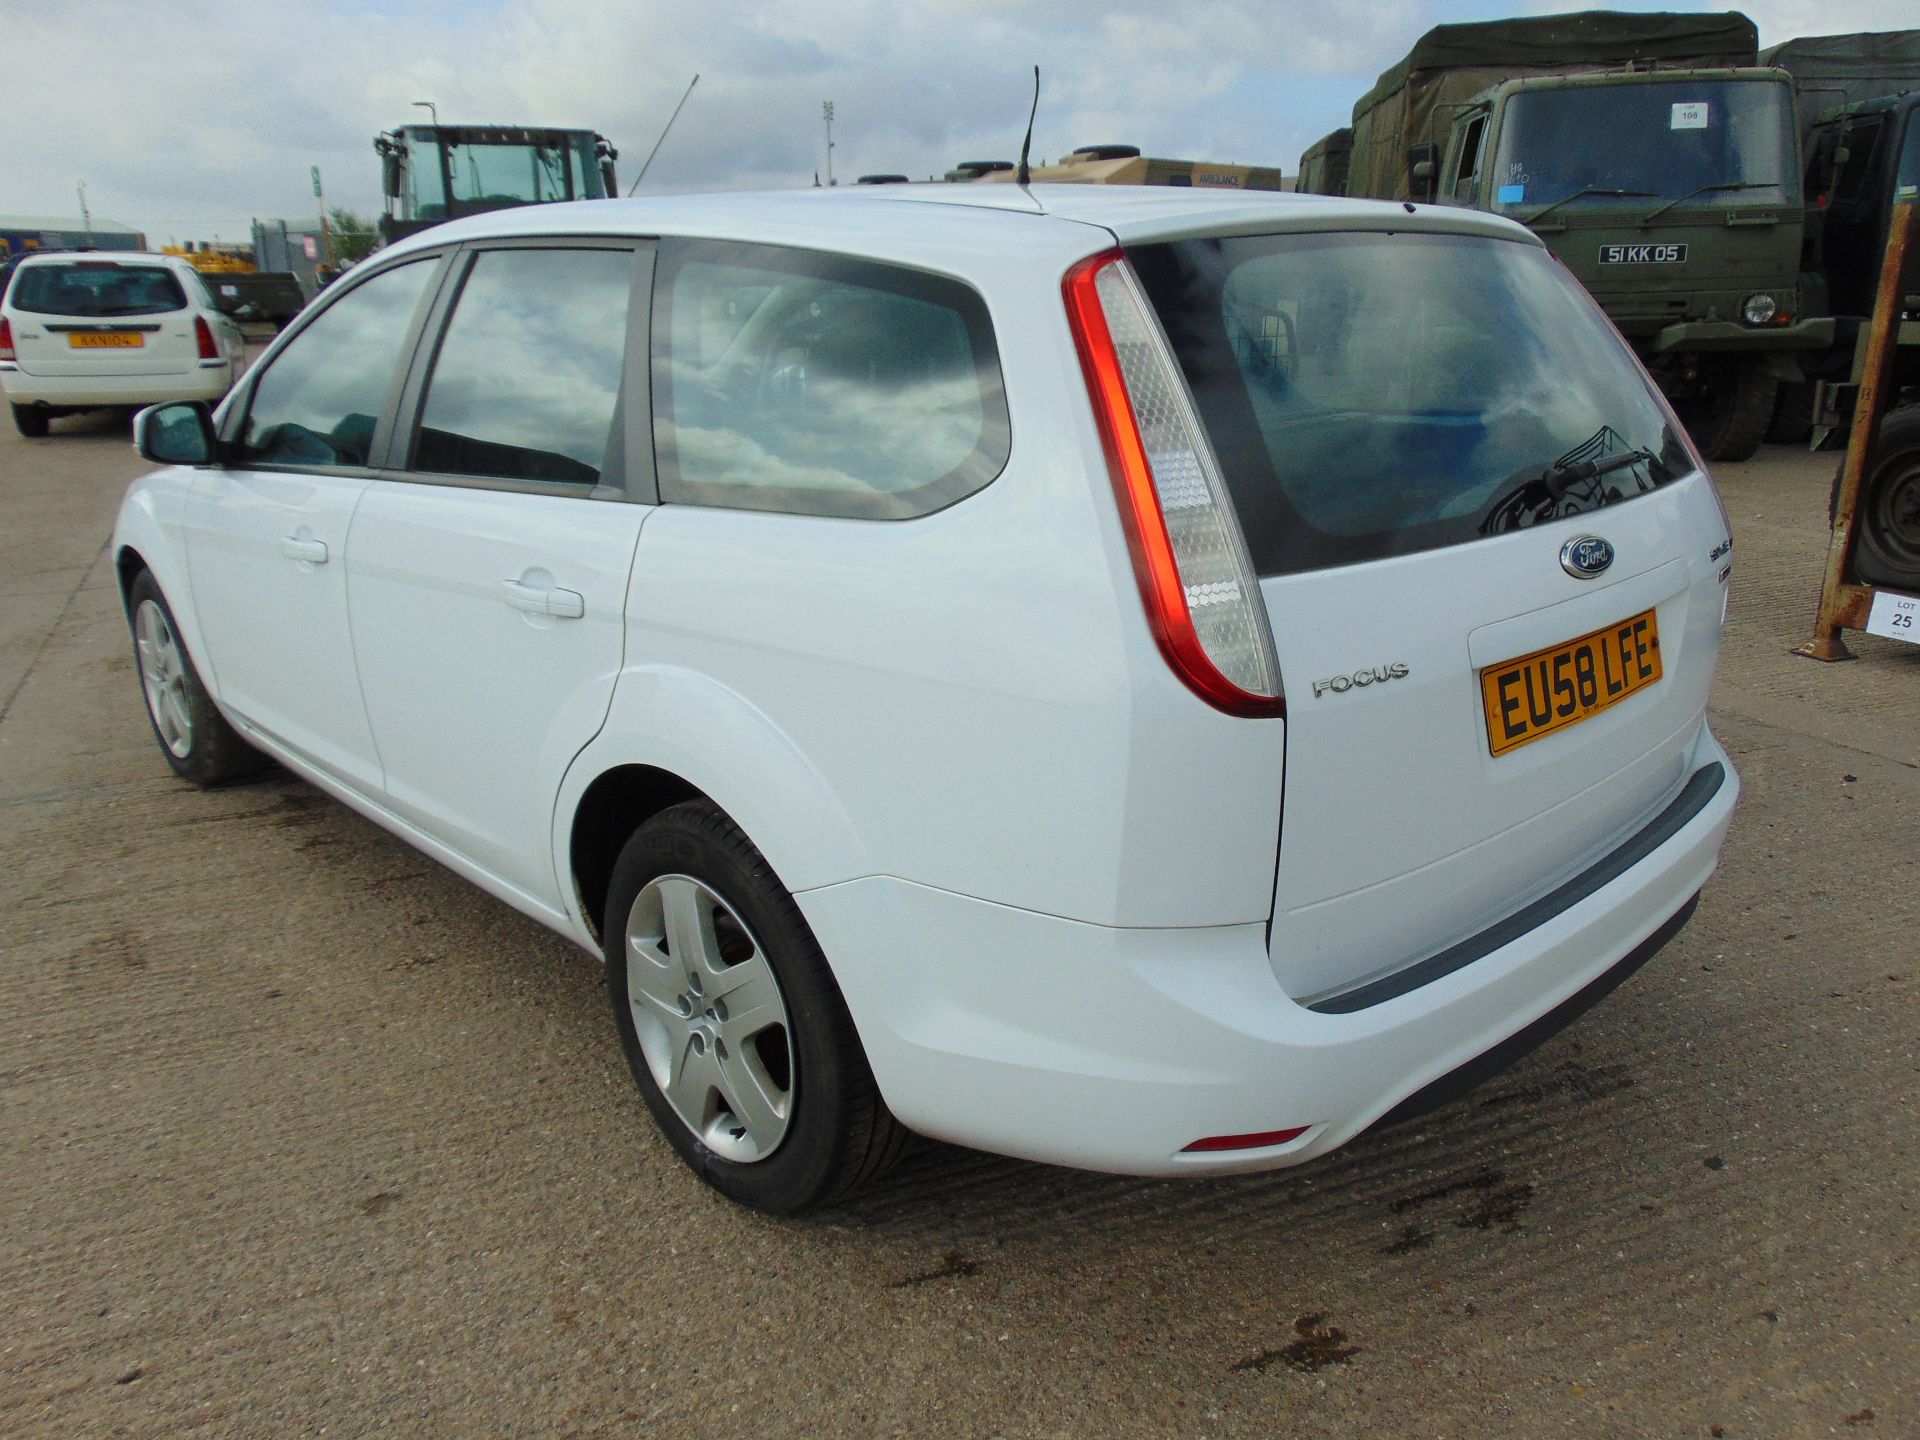 2009 Ford Focus Style 1.8l TDi Estate - Image 6 of 15